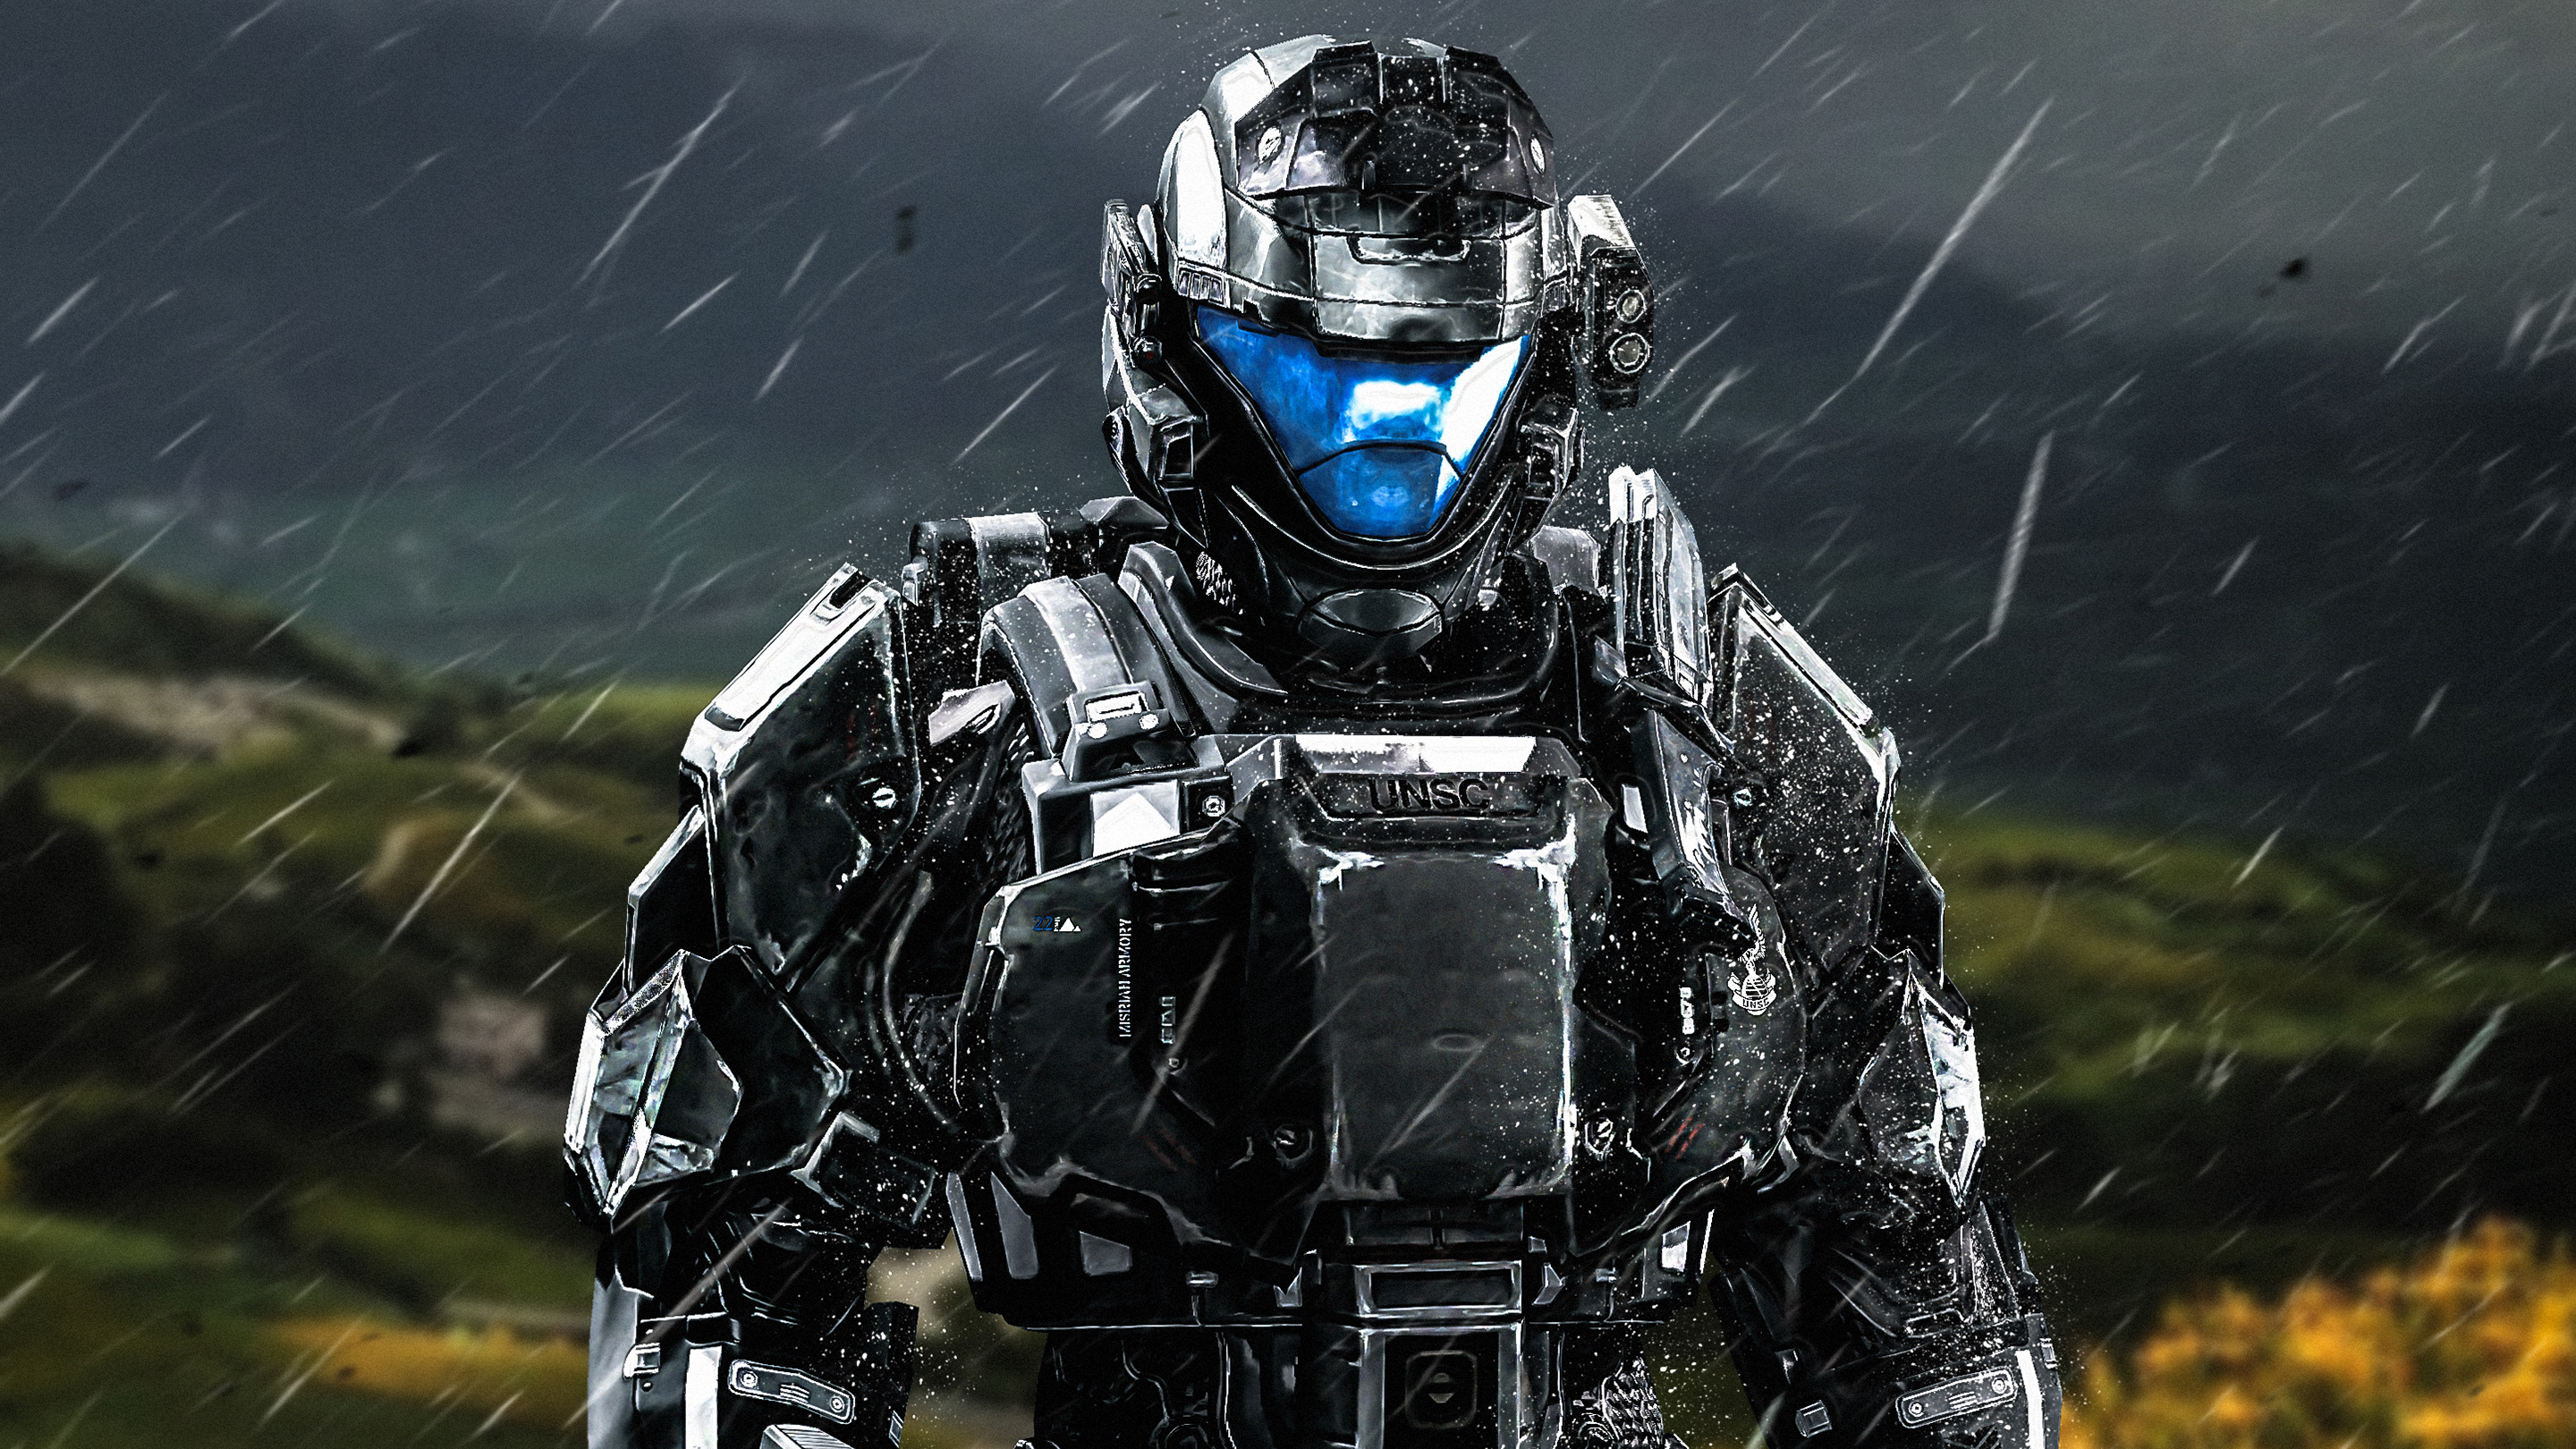 Halo 3 ODST Spartan Soldier Wallpapers